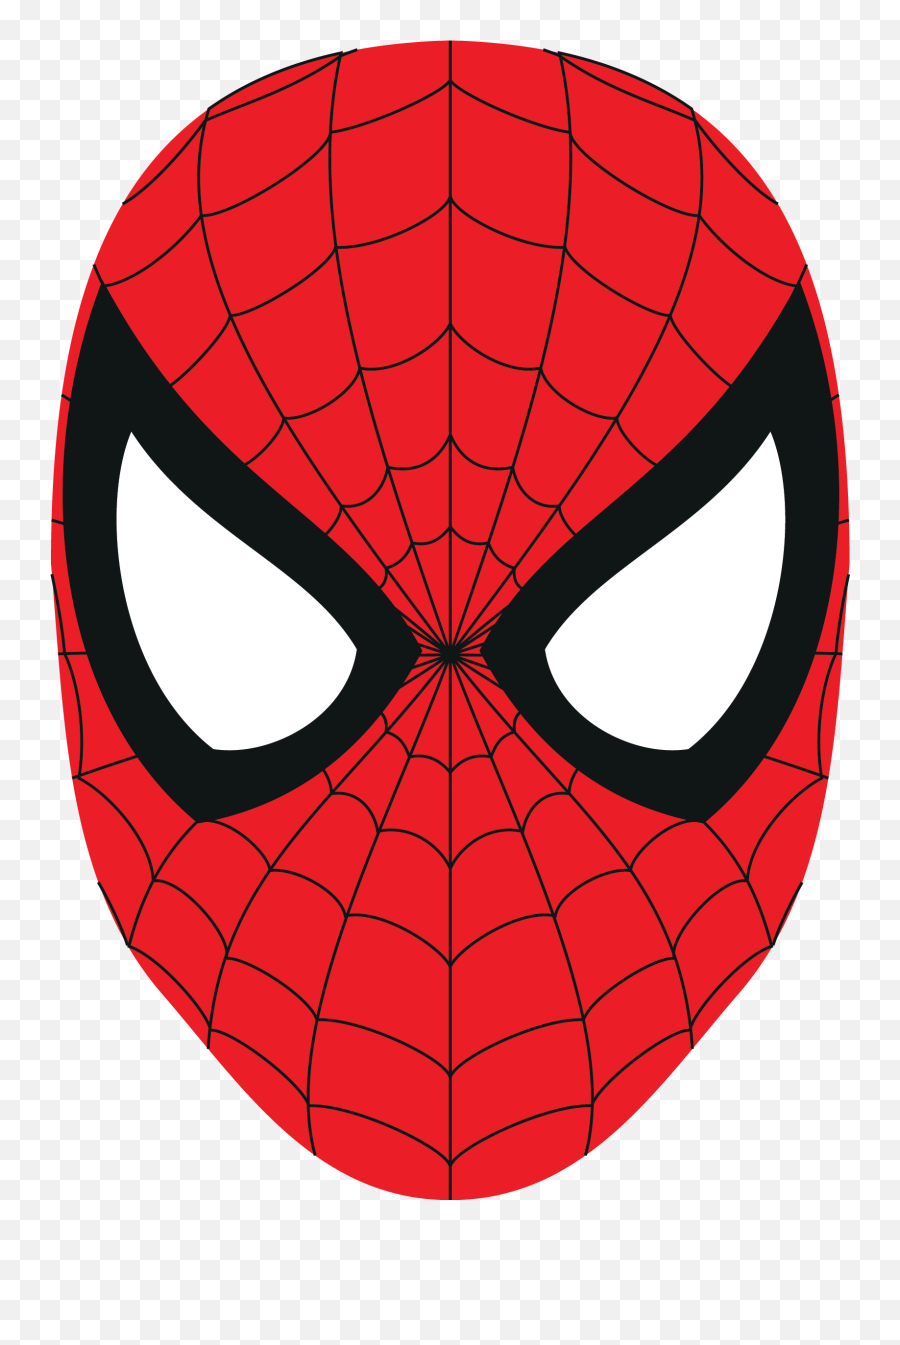 Spiderman Face Cartoon Png - Spiderman Face,Spiderman Face Png ...